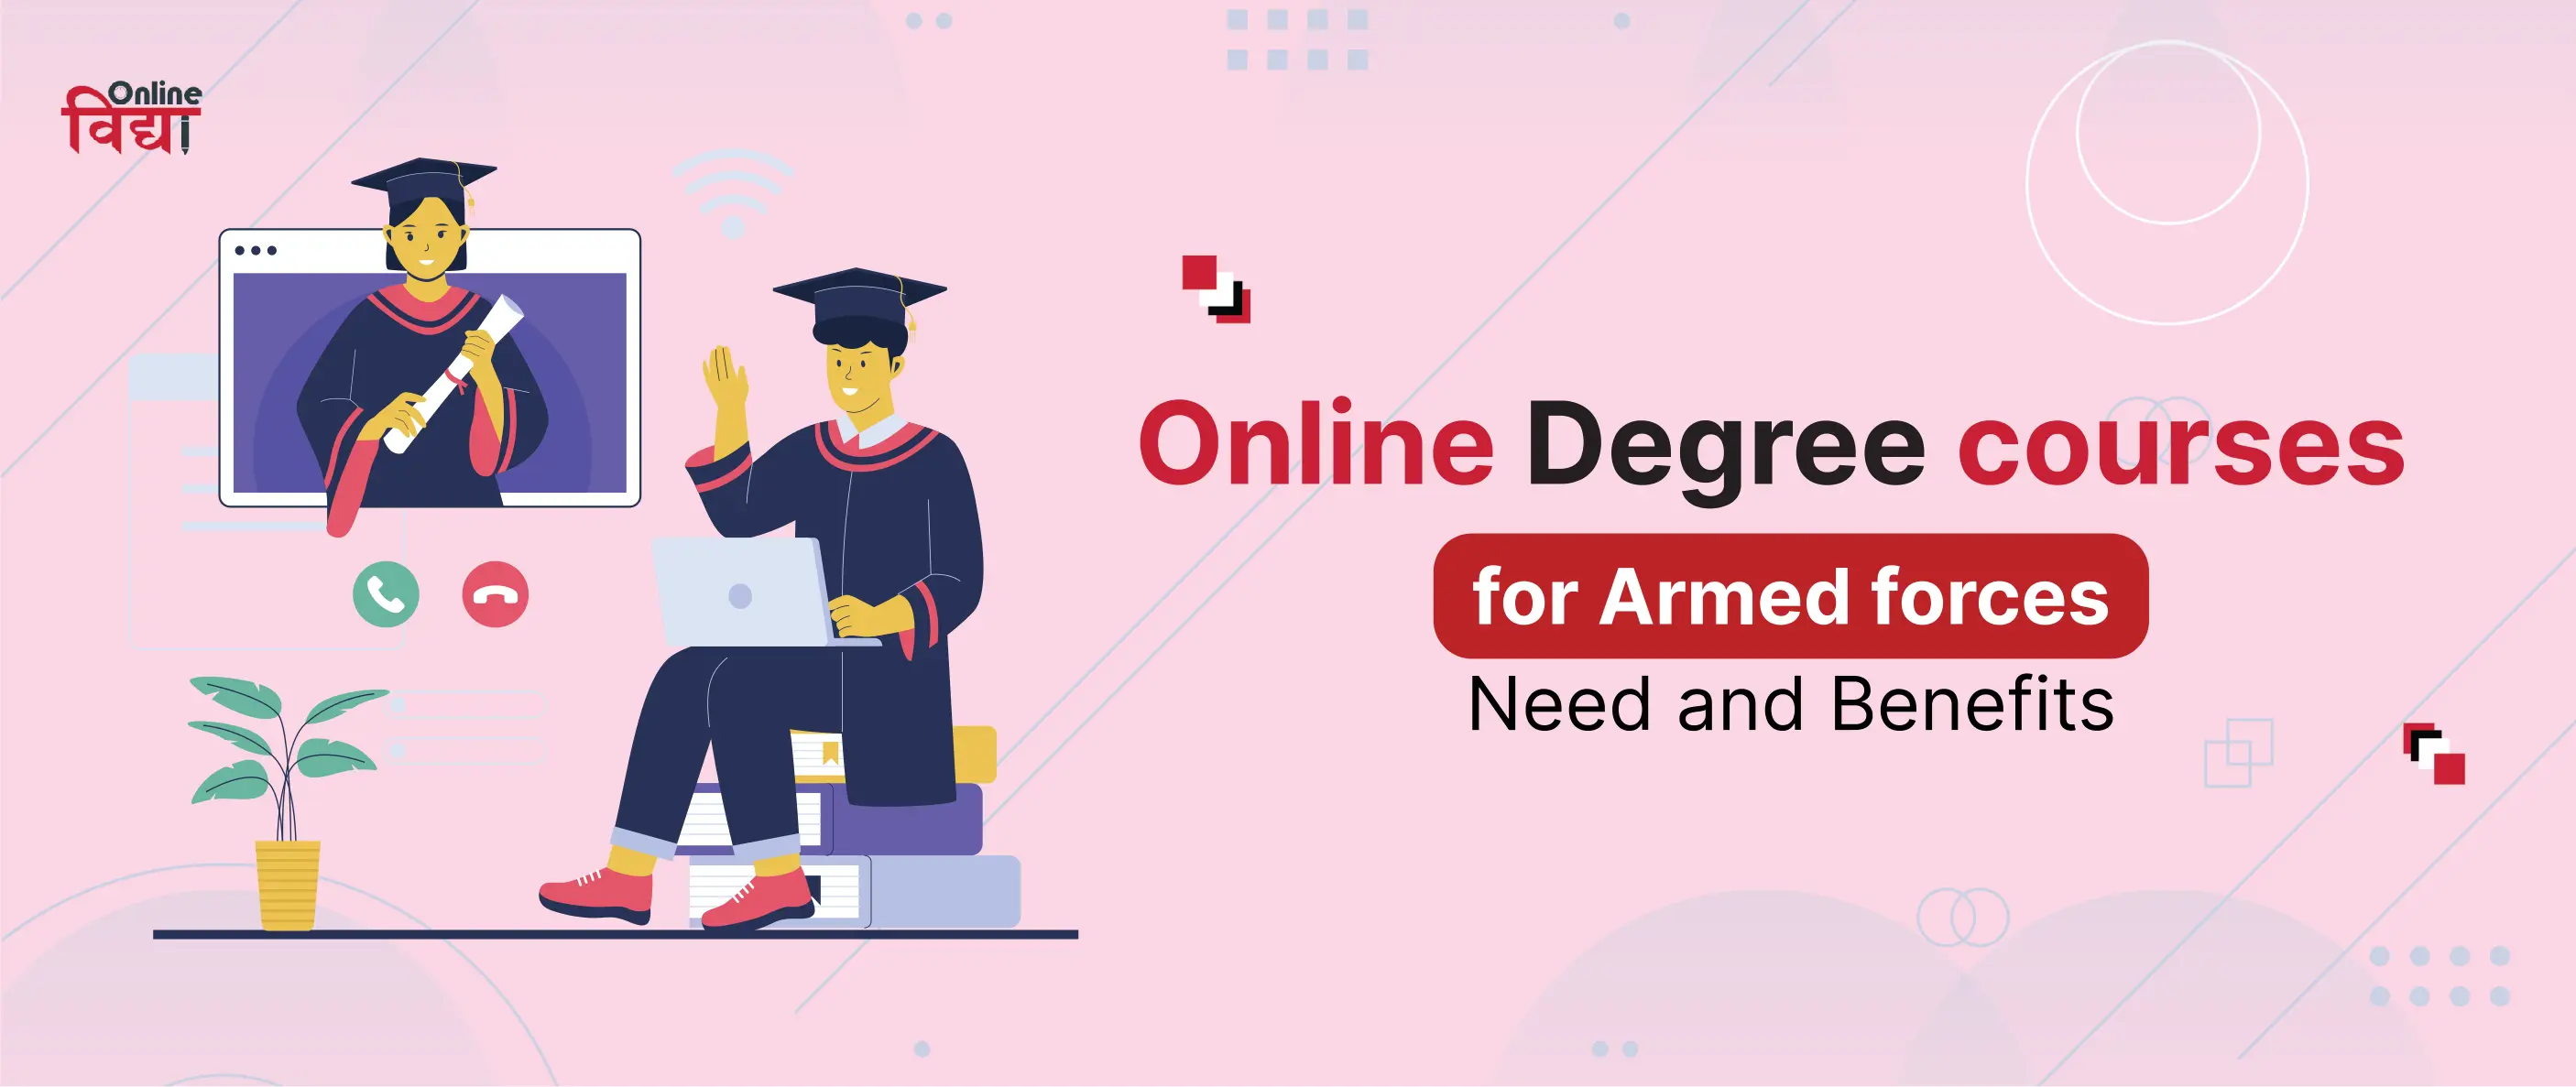 Online Degree Courses for Armed Forces Needs and Benefits